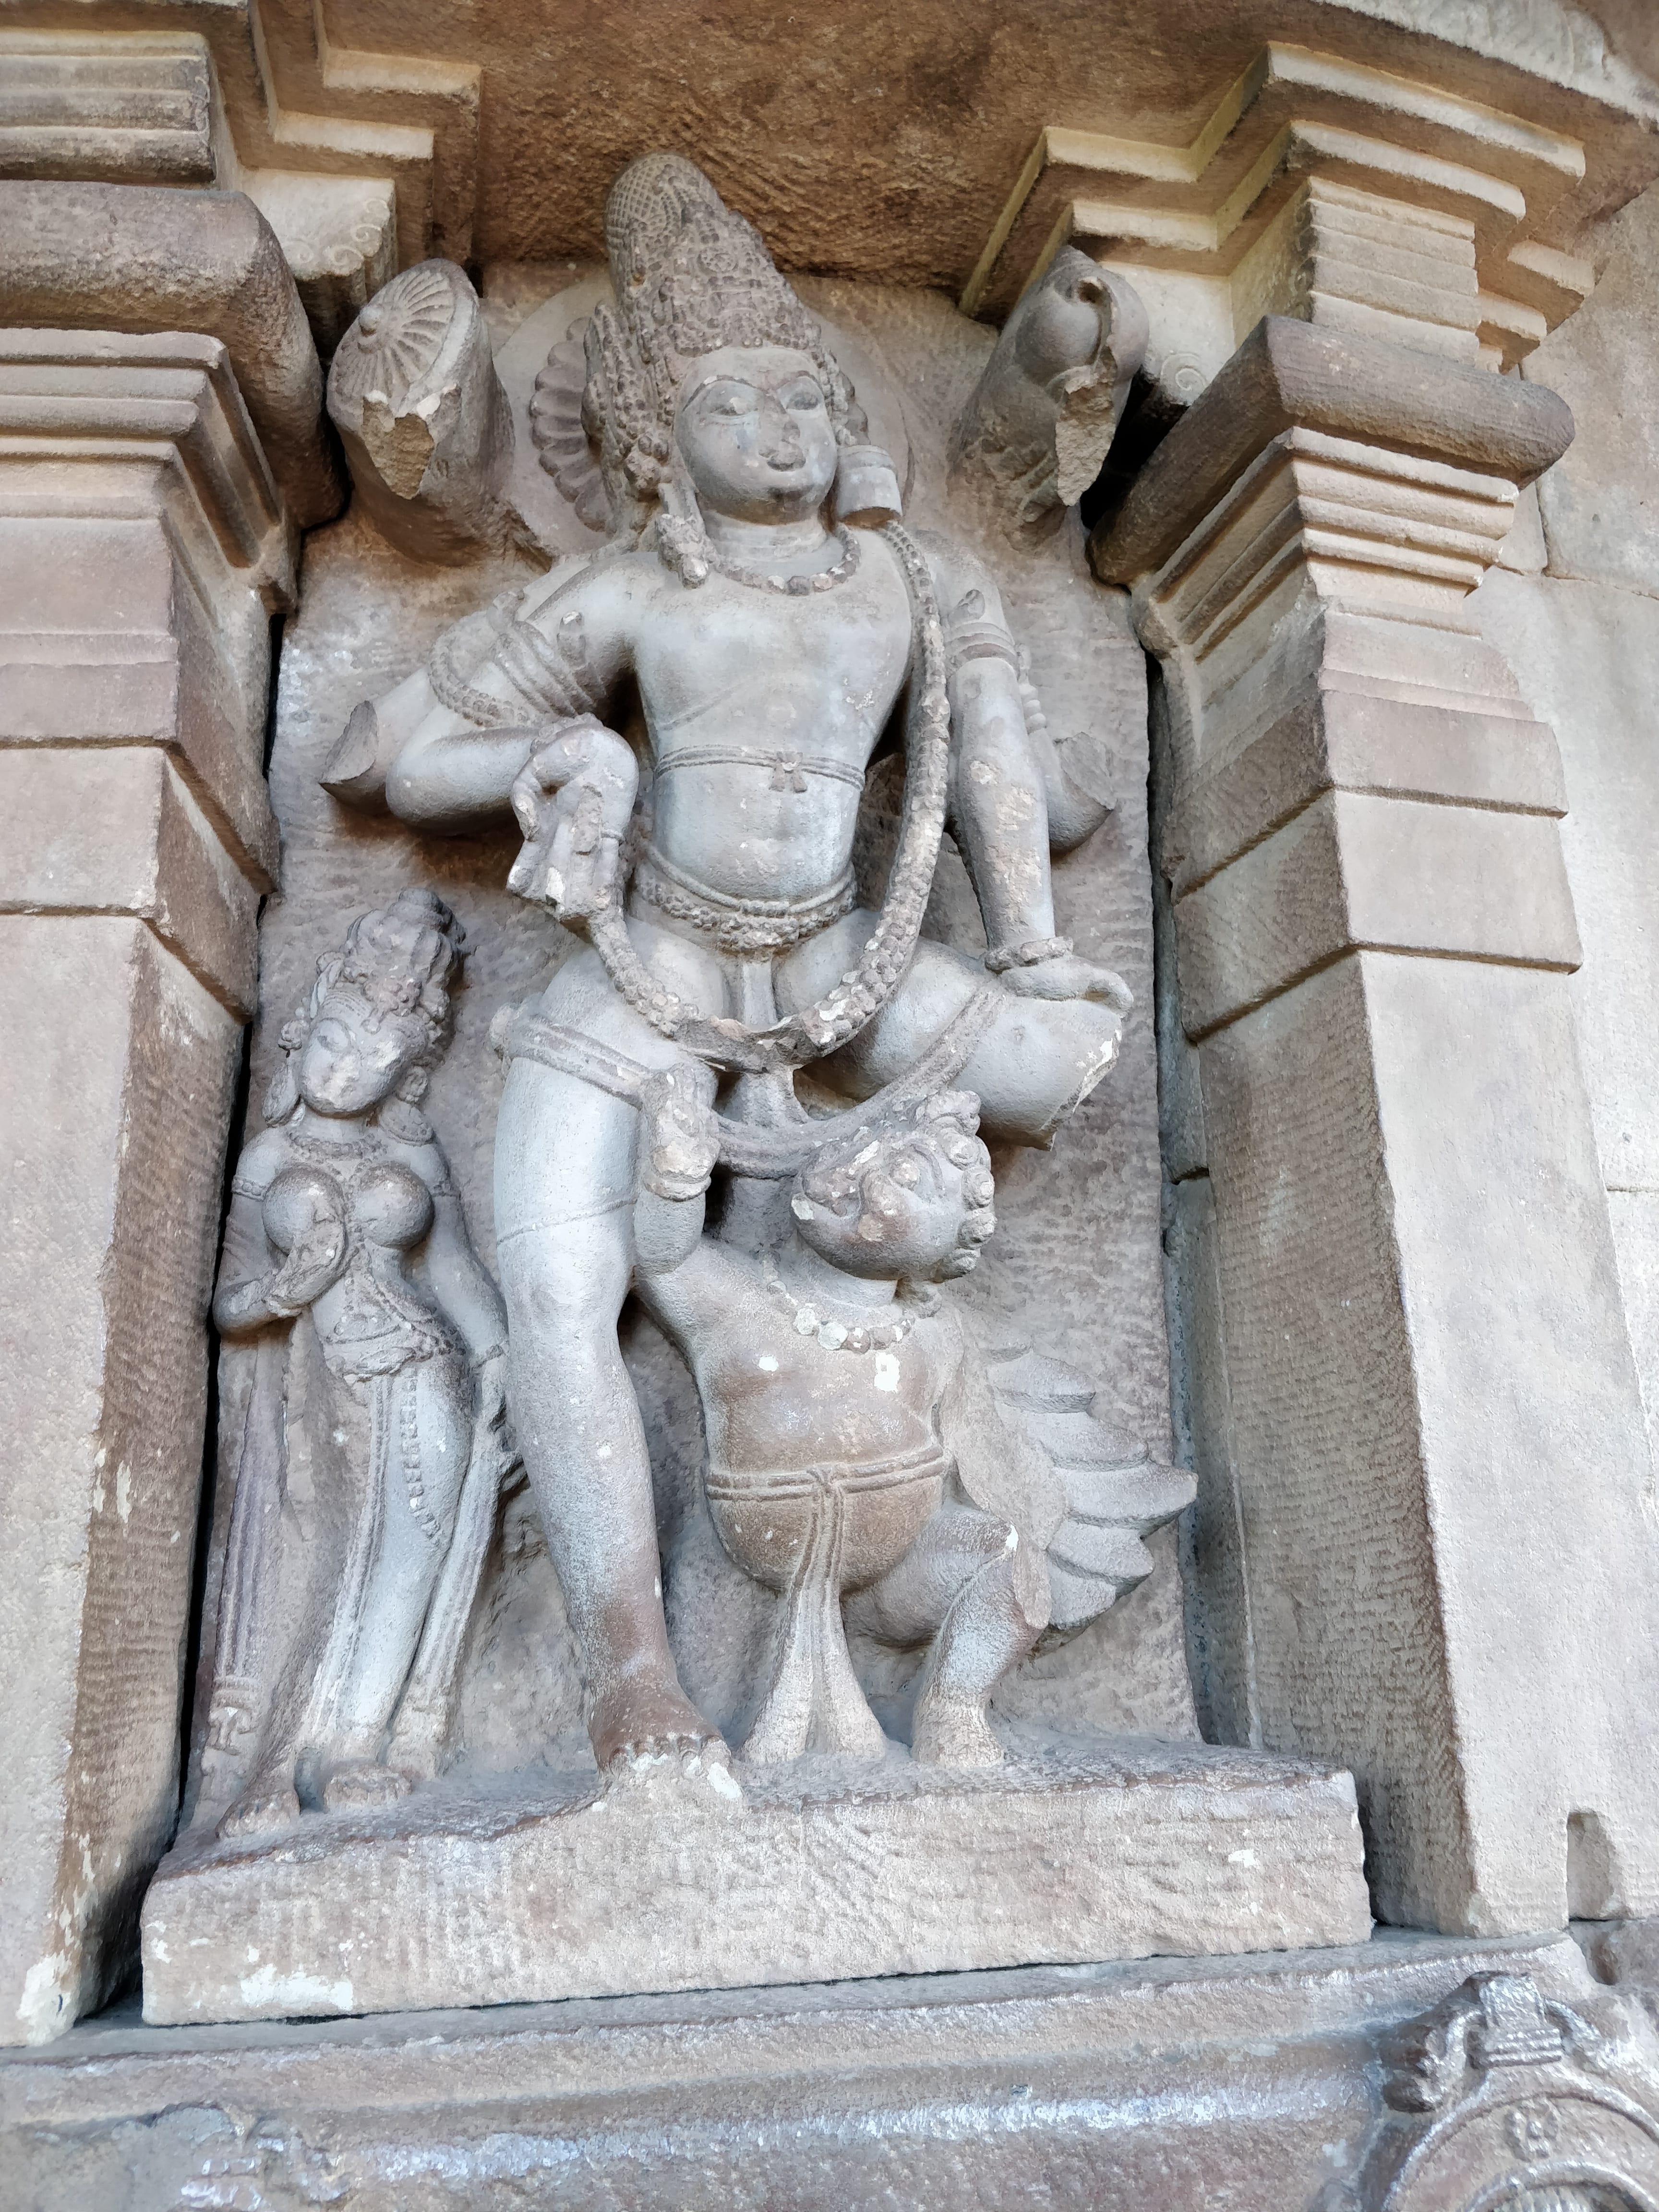 on the walls of Durga temple